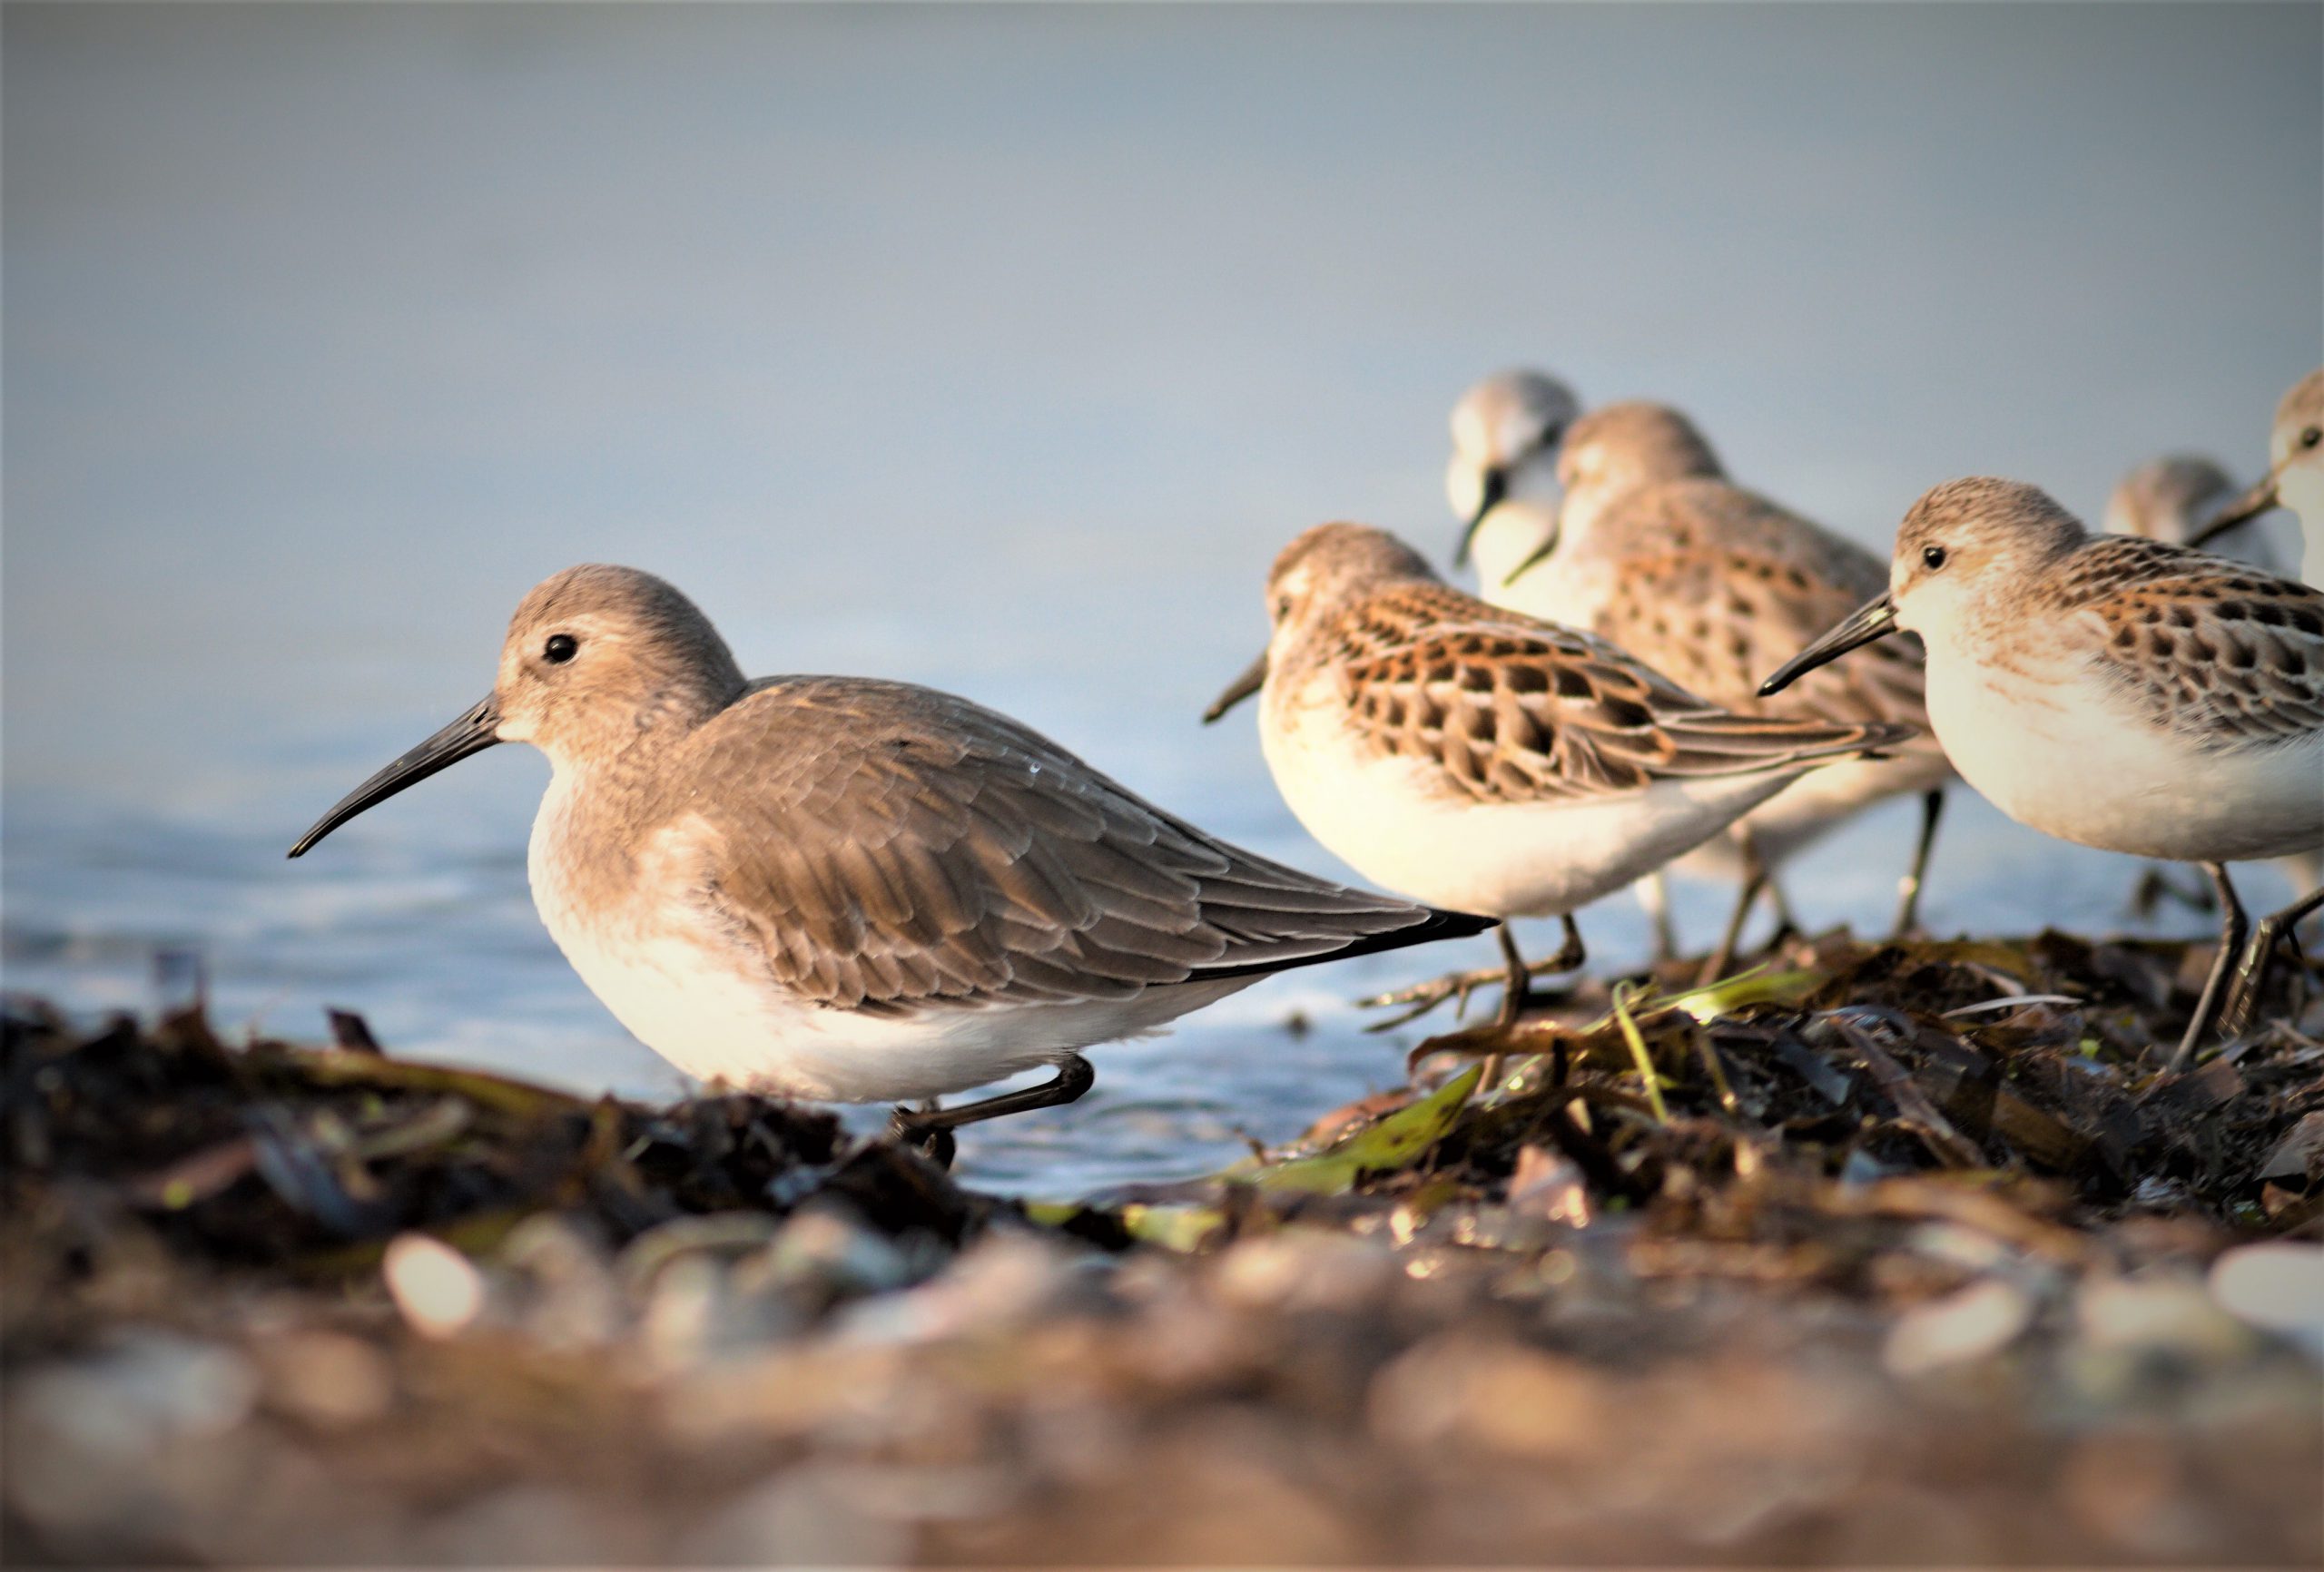 Shorebirds (Dunlin and Western Sandpipers) roosting